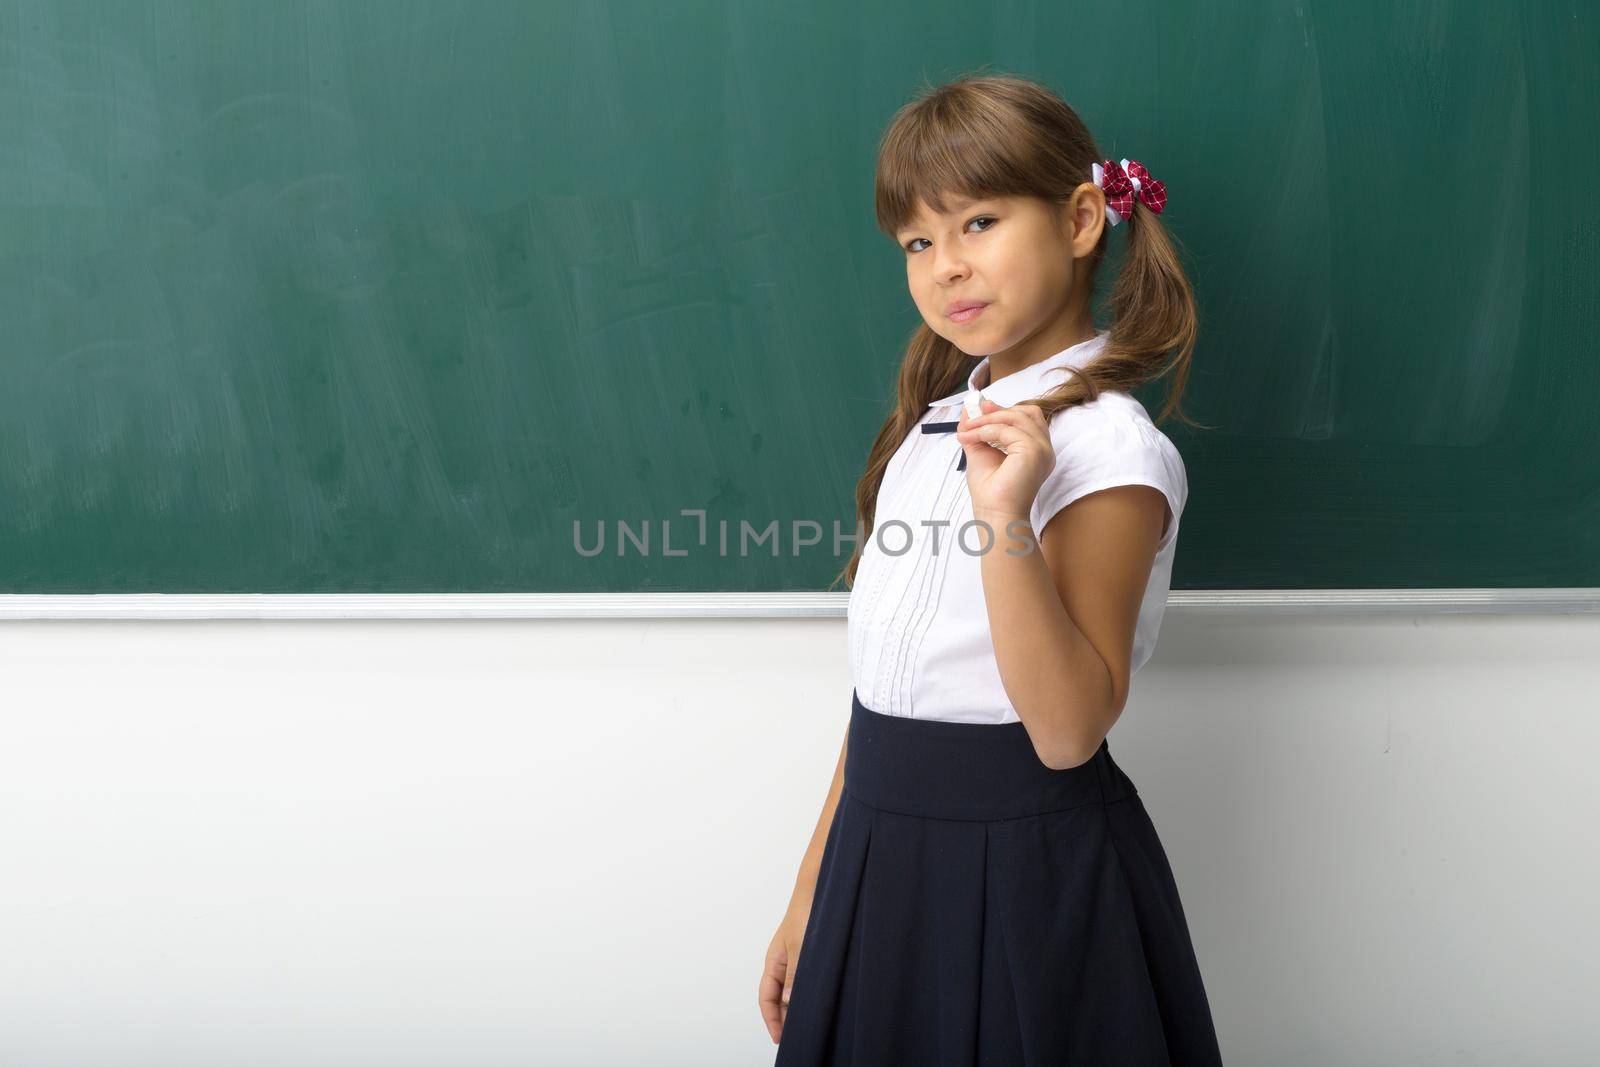 Pretty girl posing at blackboard. Portrait of beautiful schoolgirl in school uniform standing at green chalkboard with piece of chalk in her hand and looking at camera. School and education concept